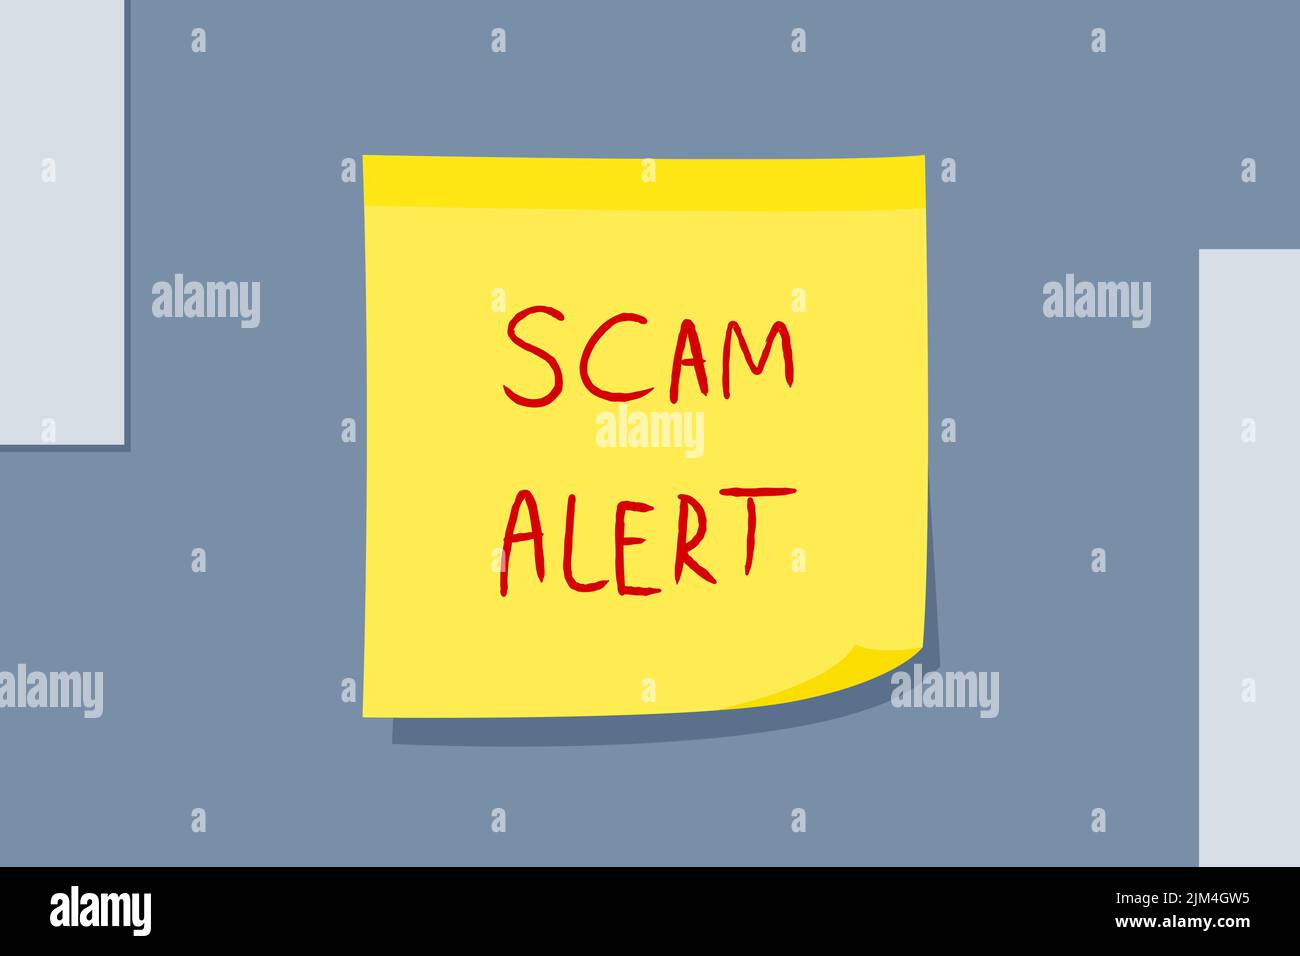 Scam alert. Online scam warning. Yellow sticky note message. Paper sign. Stock Vector